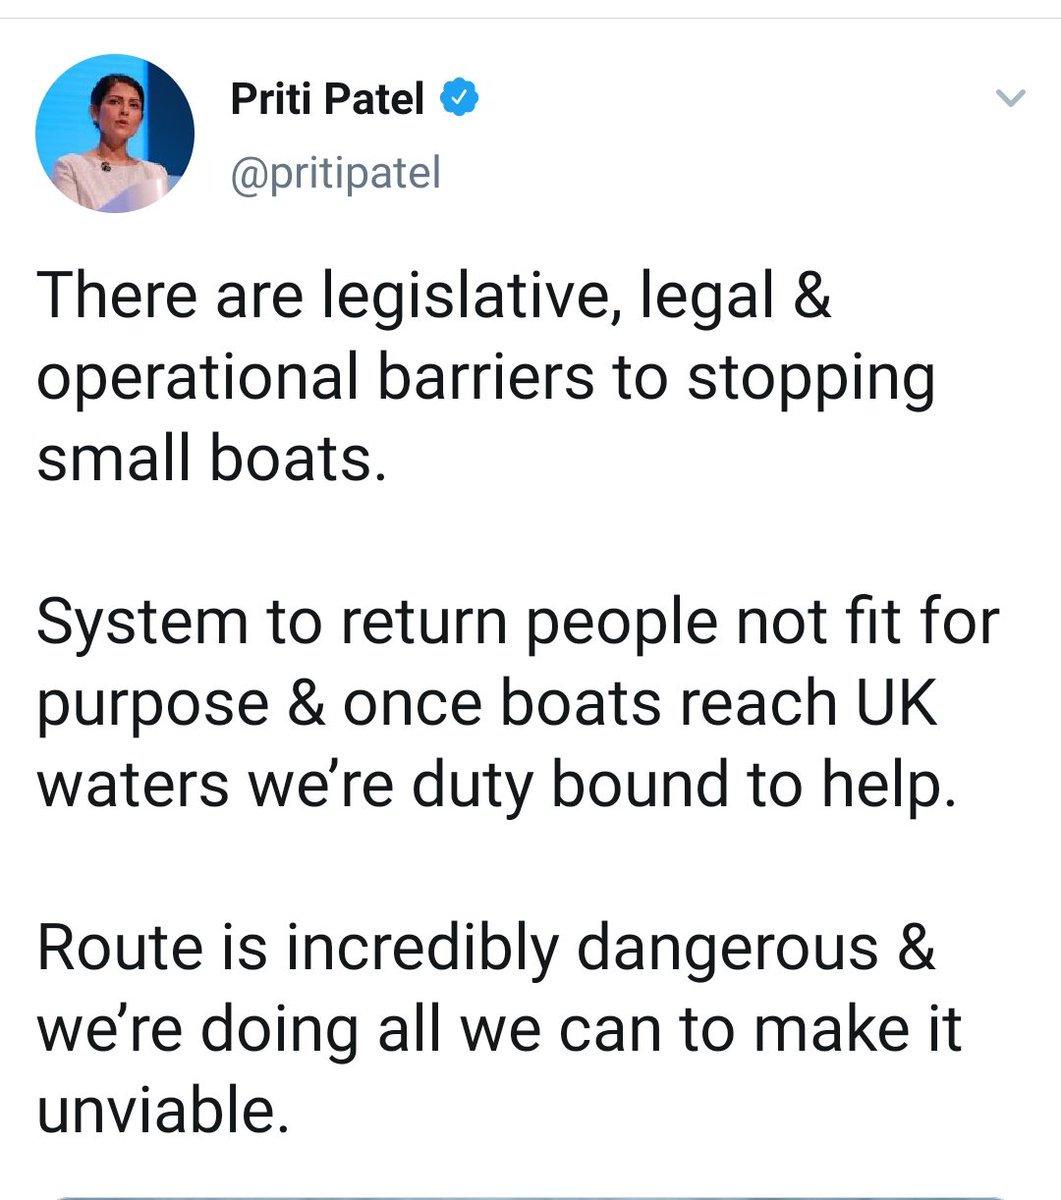 Priti Patel - 2nd generation immigrant, Home Secretary & 3rd in command of UK - refers to human beings as 'Return People Not Fit For Purpose' This is Hostile Environment Mentality. Her MASK slipped Regardless what Party you're affiliated to, this is REPUGNANT Fire @pritipatel